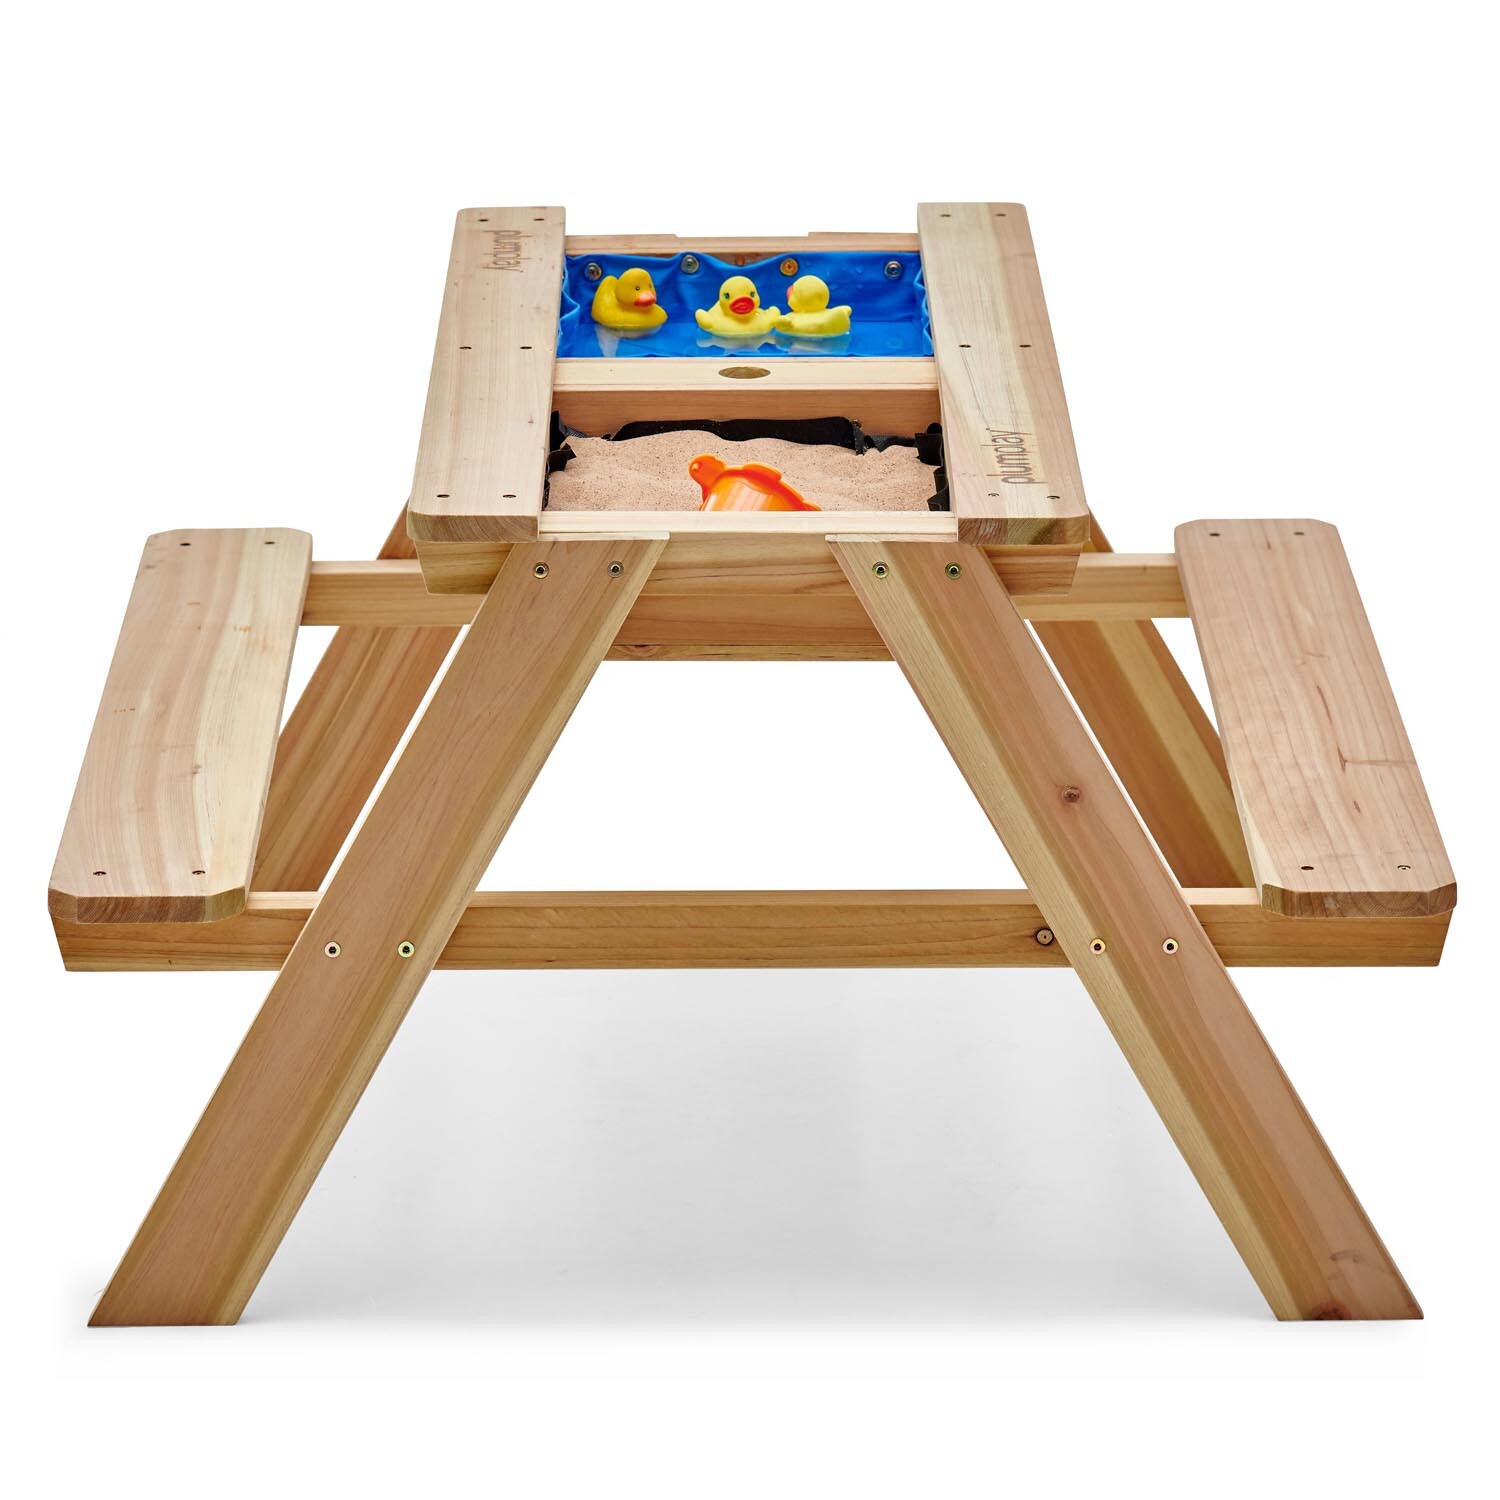 Wooden Sand & Water Picnic Table - Brown Image 10